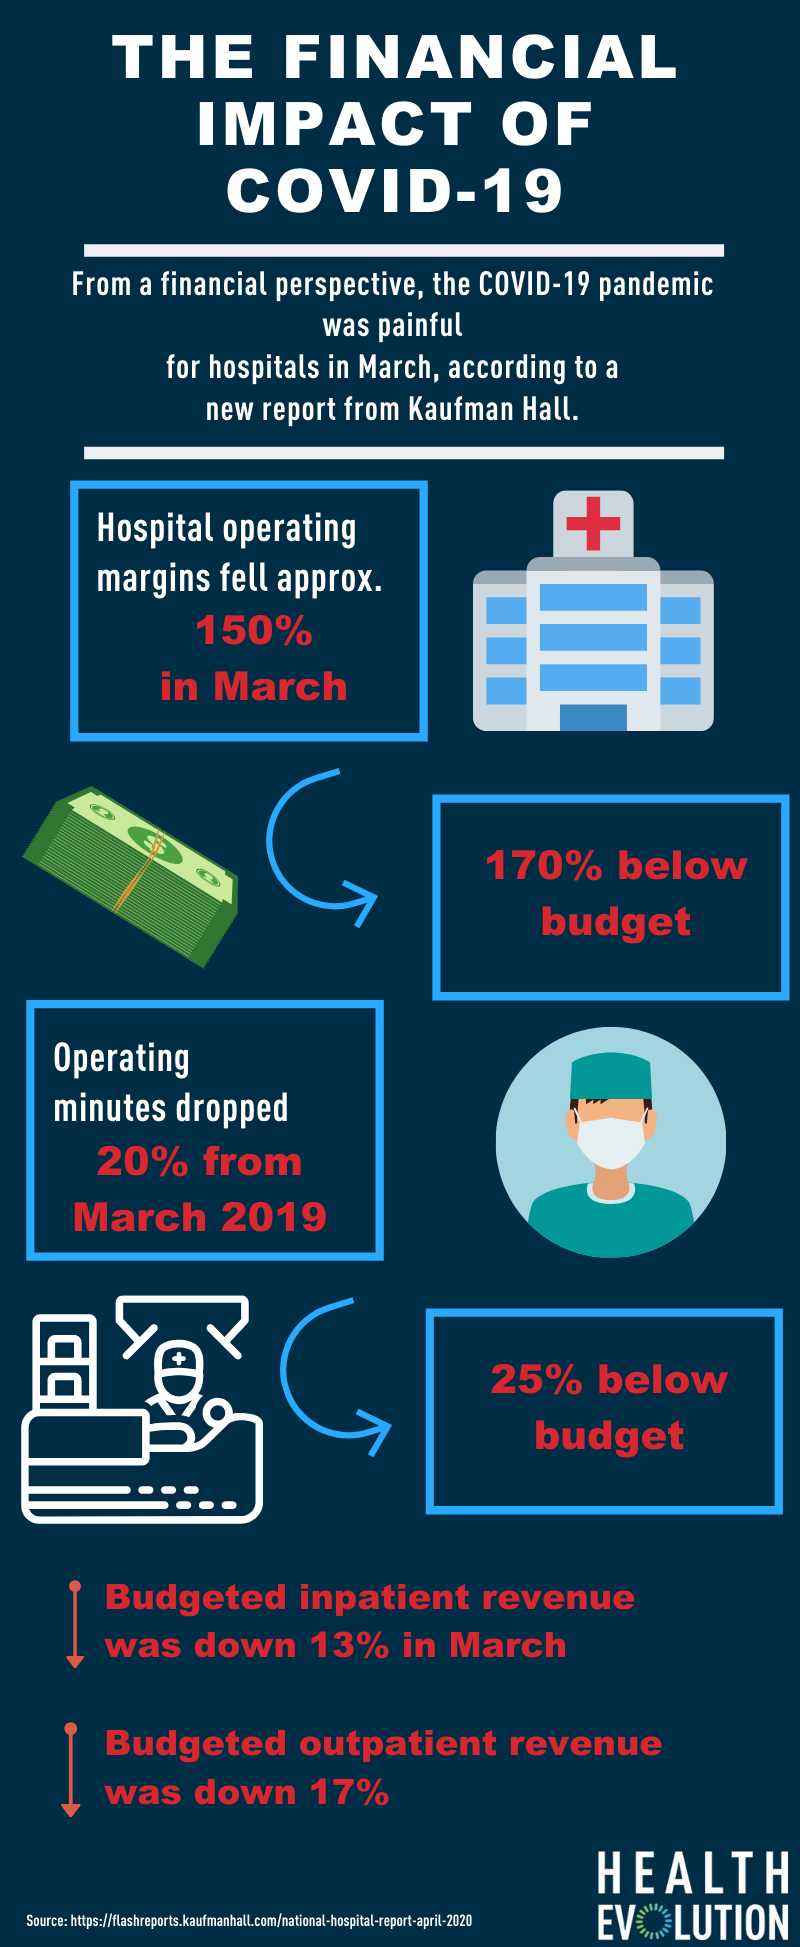 Hospitals’ finances plunged in March thanks to COVID-19